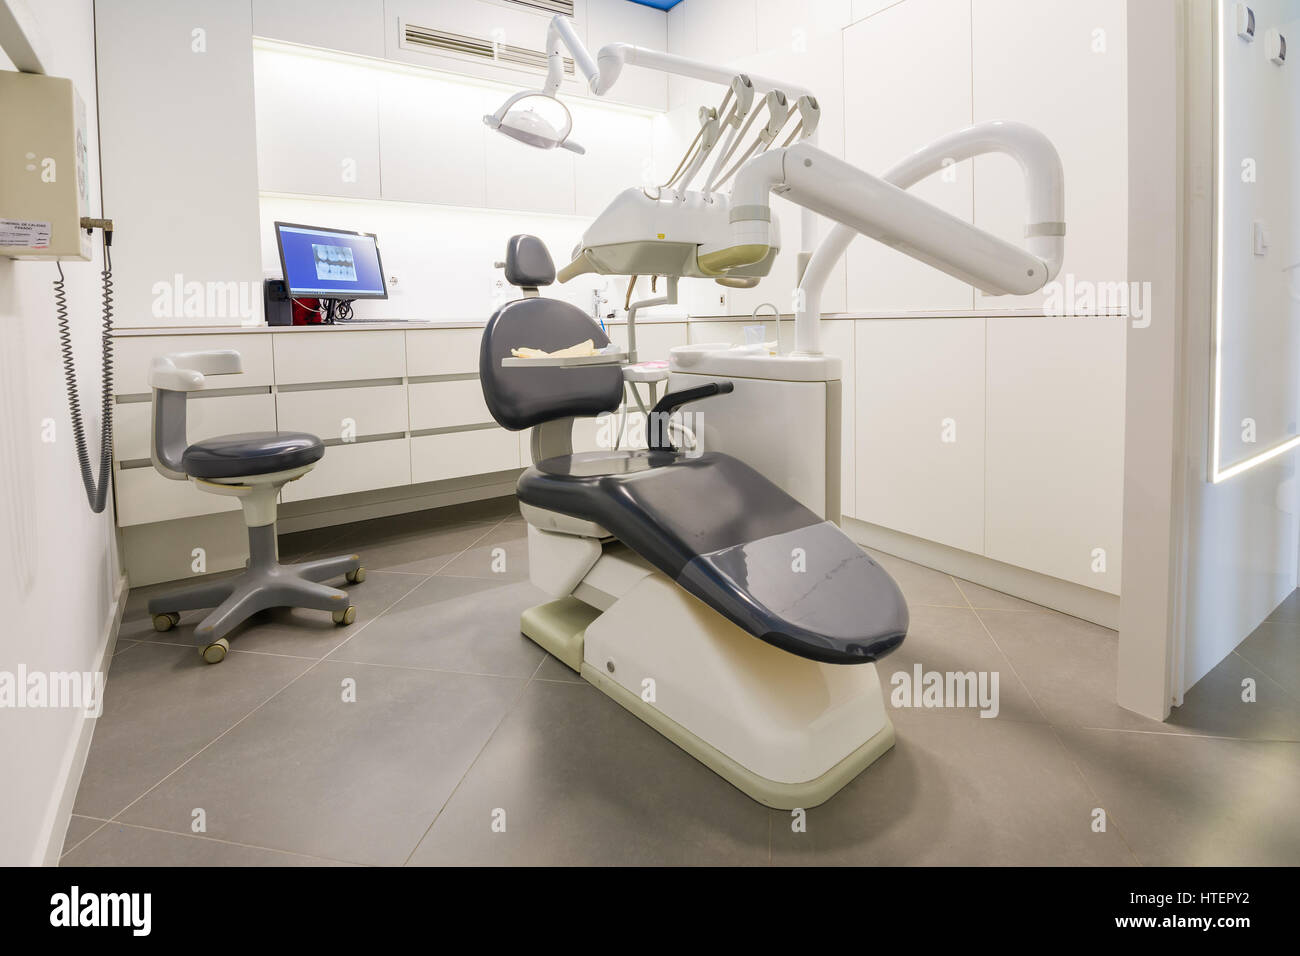 Dental clinic cabinet with dental chair Stock Photo